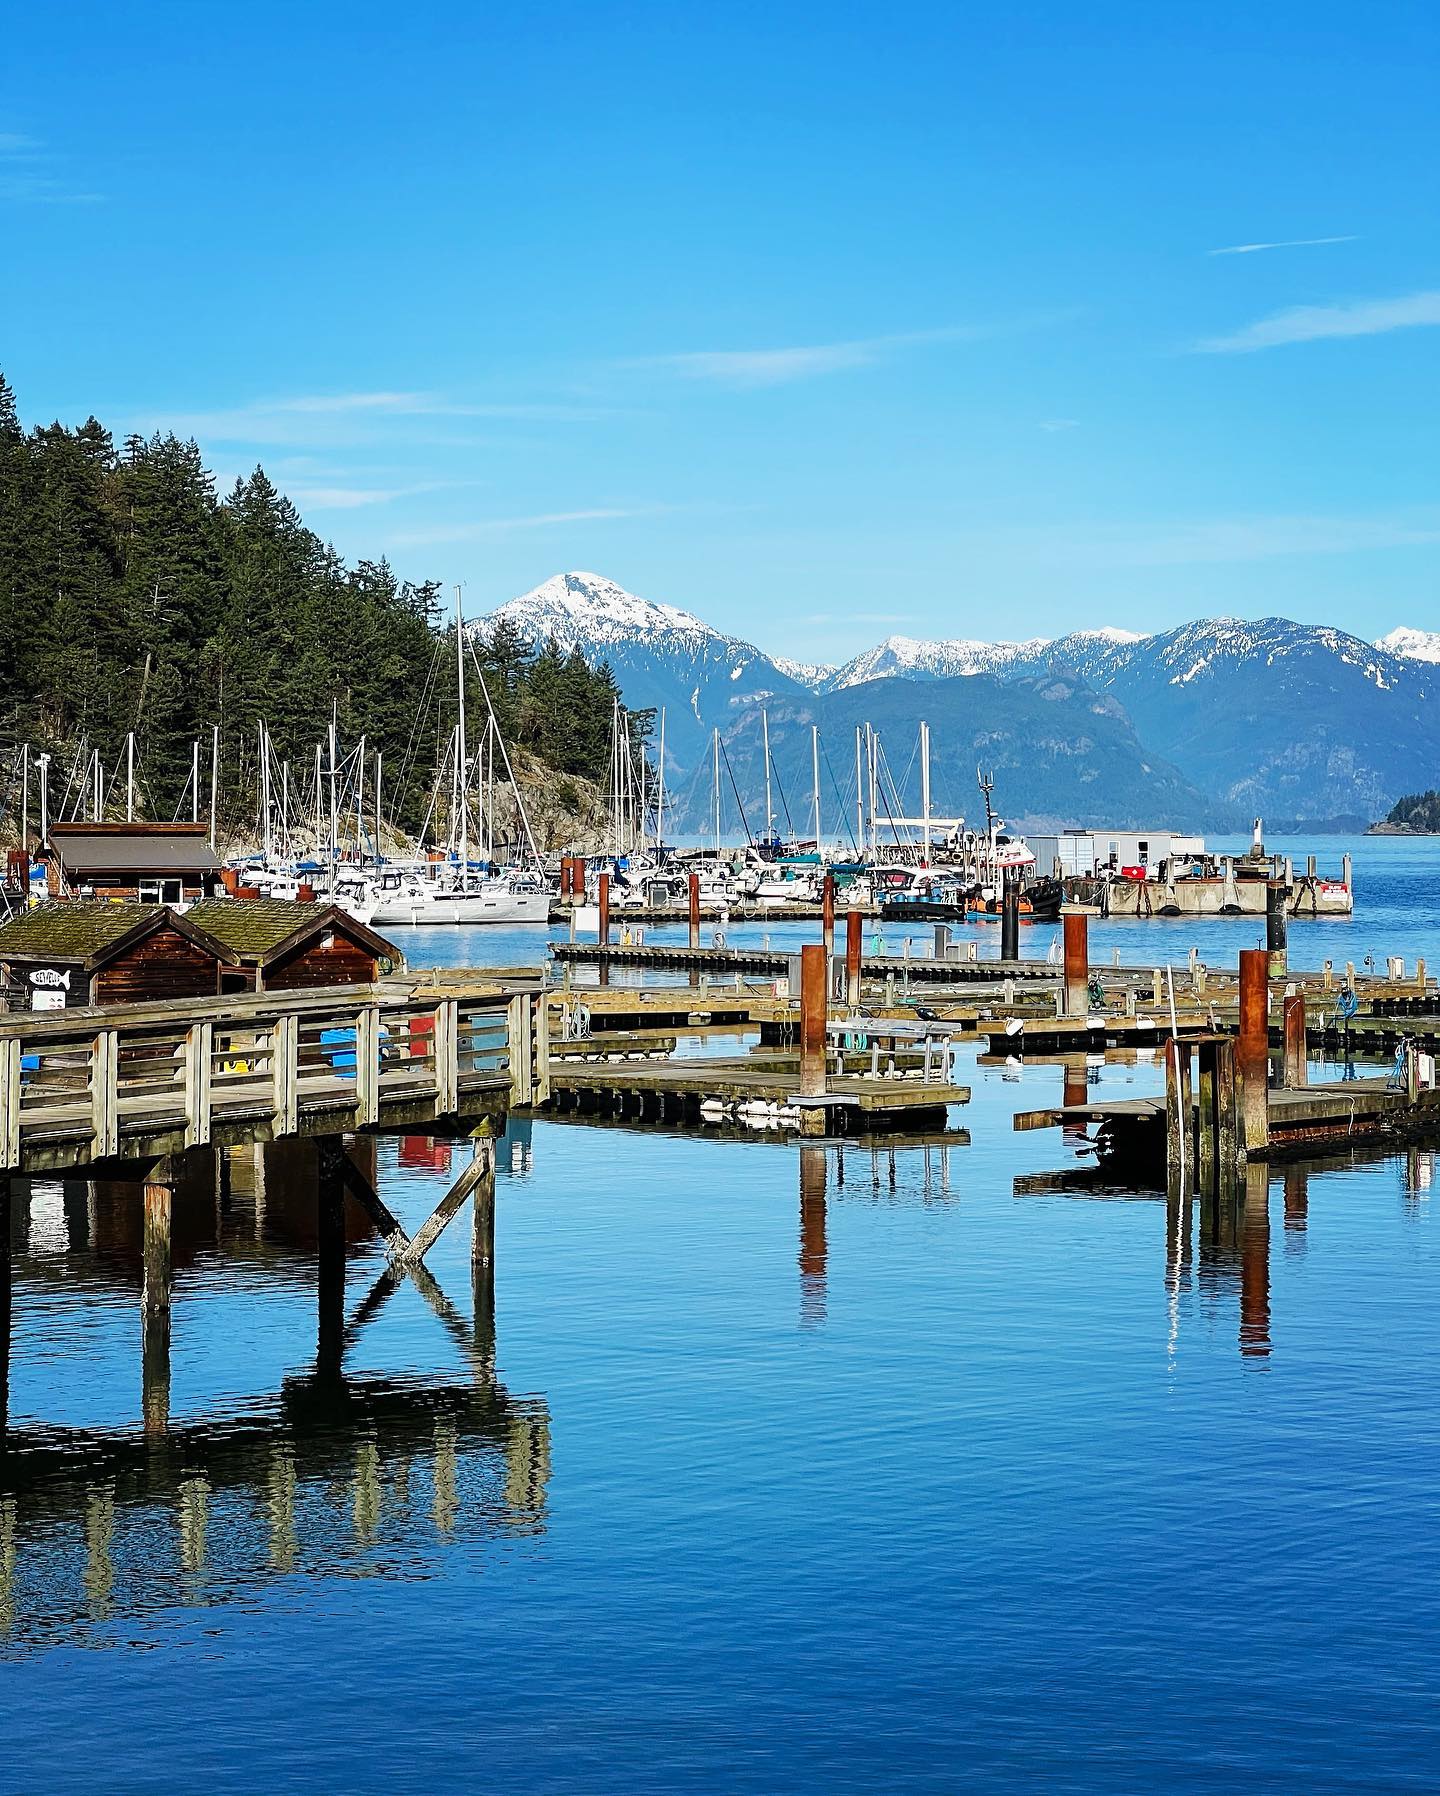 I’m so ready for blue skies! Although Spring has officially started, Vancouver hasn’t really showed much of it (yet). I guess they call it Raincouver for good reason.
.
.
#raincouver #bay #boats #views #snowymountains #bluesky #harbour #bowenisland #bccanada #canada #britishcolumbia #beautifuldestinations #coldday #explorenorthshore #beautifulplaces #travel #explore #boat #roadtrip #sailing #bcferries #reisfotografie #reizen #emigreren #reistypje